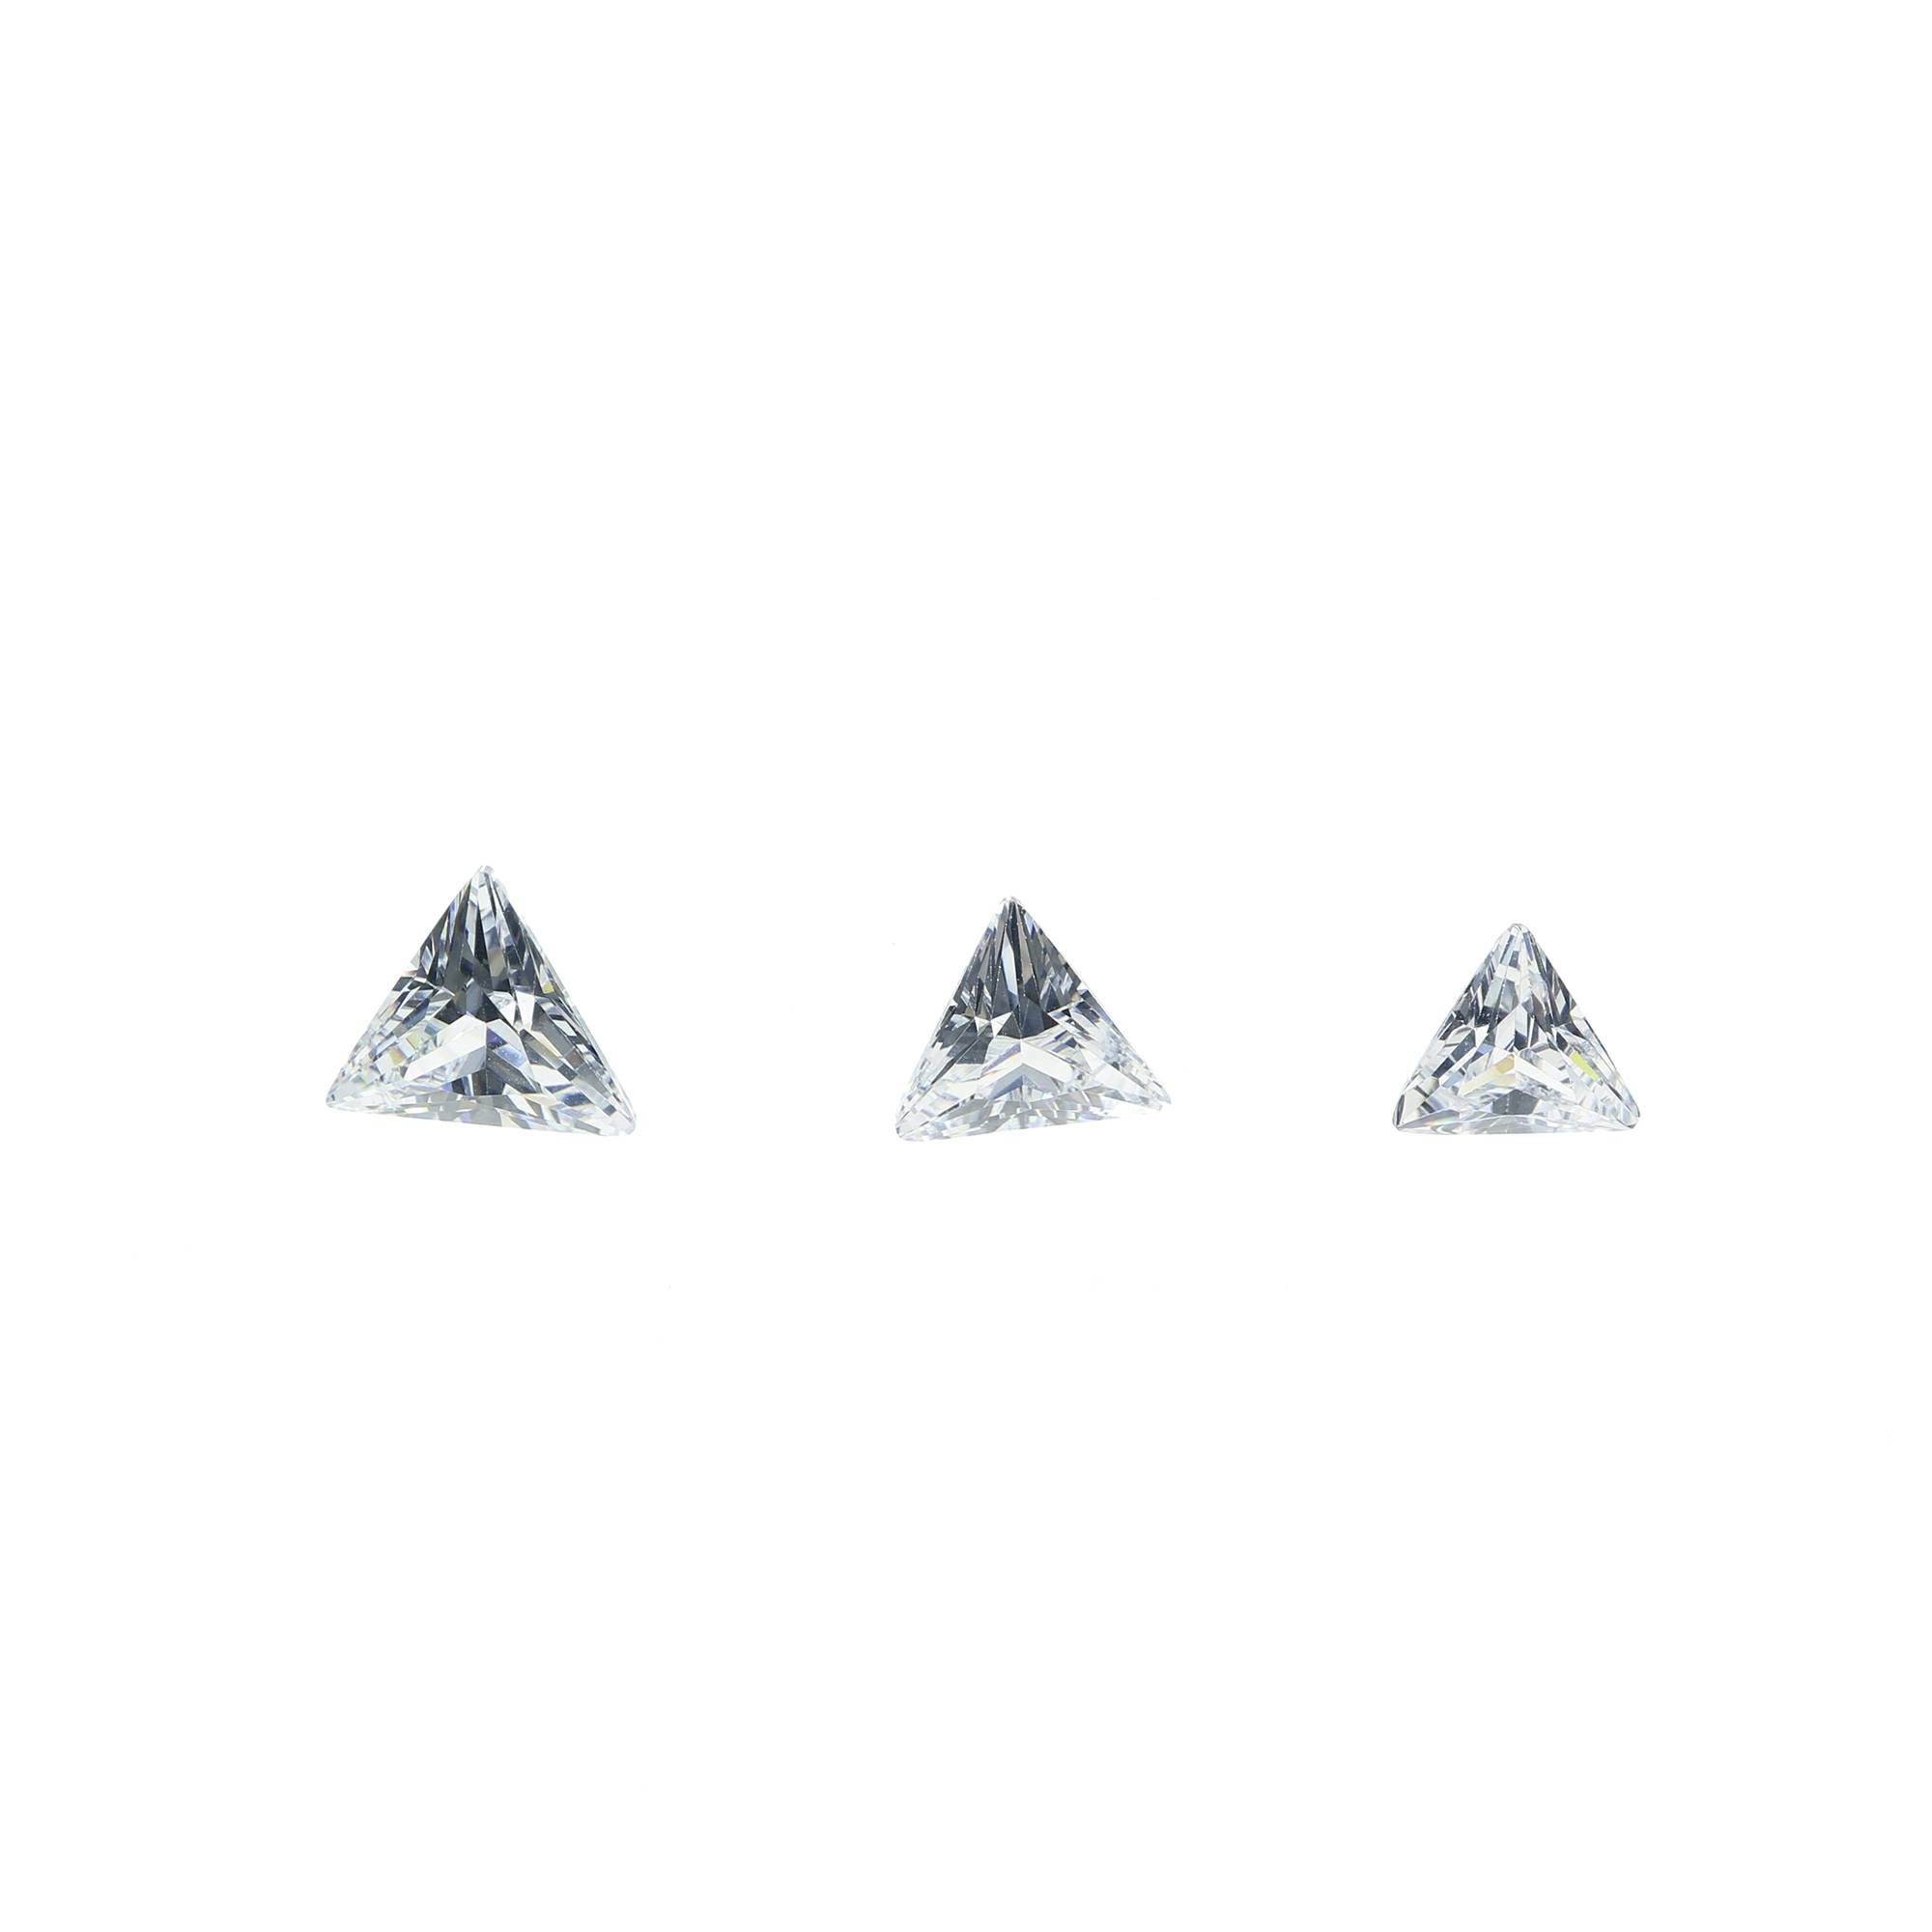 1Pcs Multiple Size Triangle Shape Moissanite Stone Faceted Imitated Diamond Loose Gemstone for DIY Engagement Ring D Color VVS1 Excellent Cut 4160020 - Click Image to Close